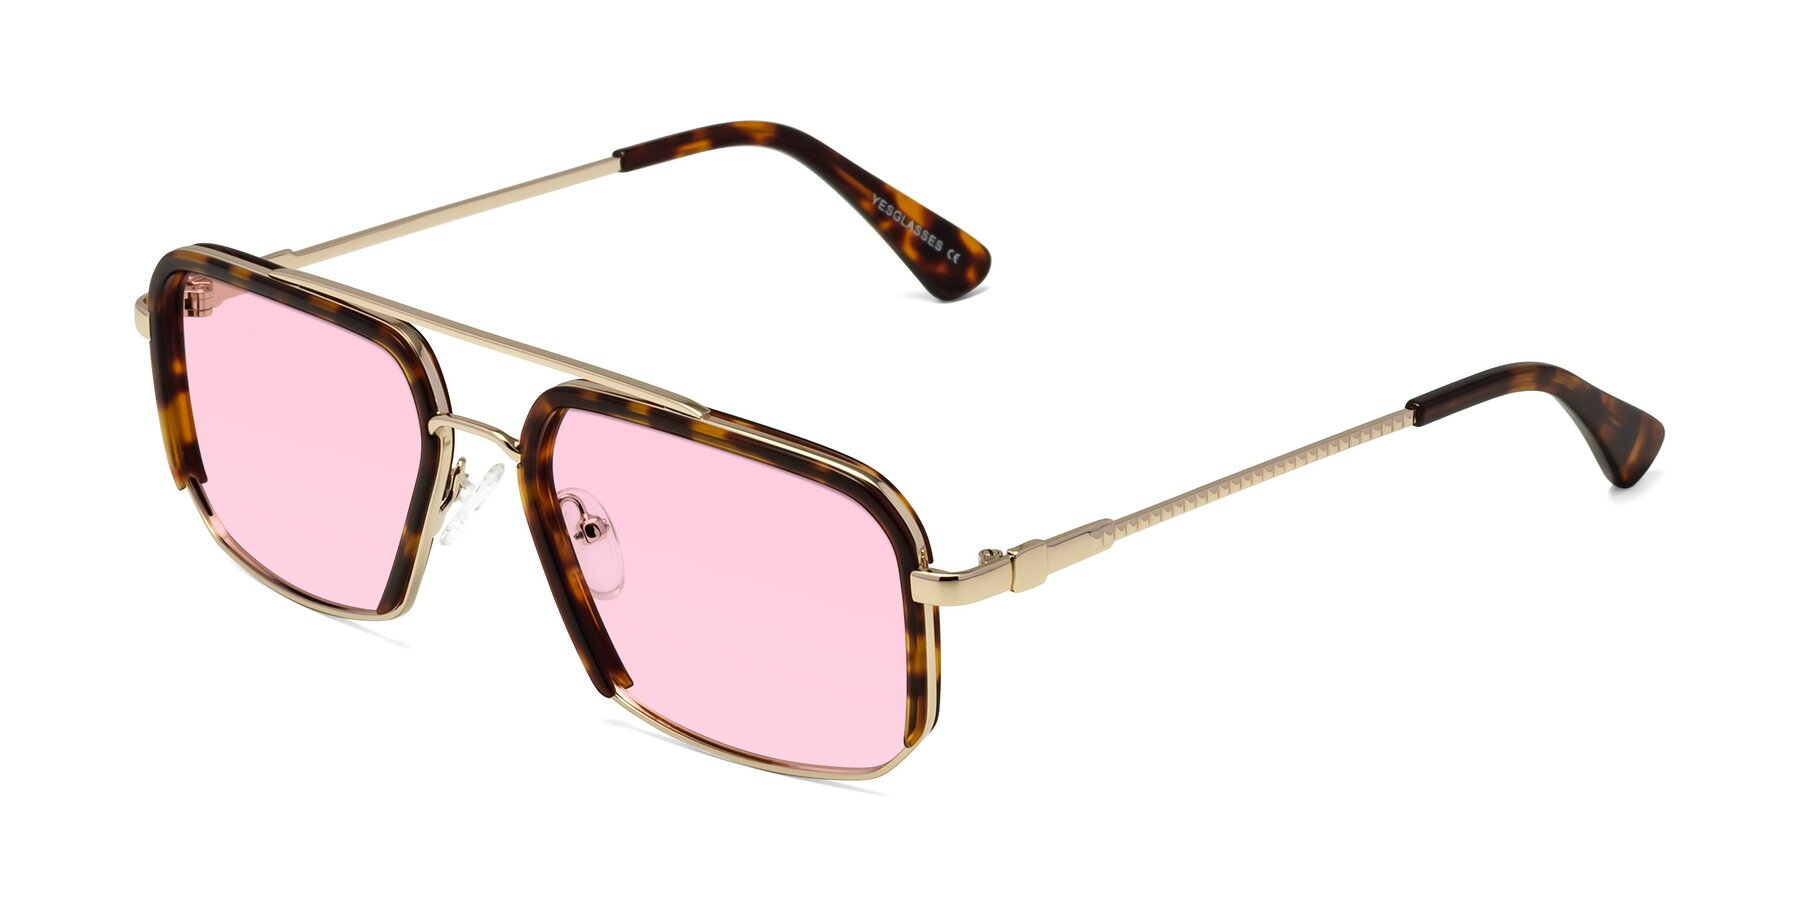 Angle of Dechter in Tortoise-Gold with Light Pink Tinted Lenses